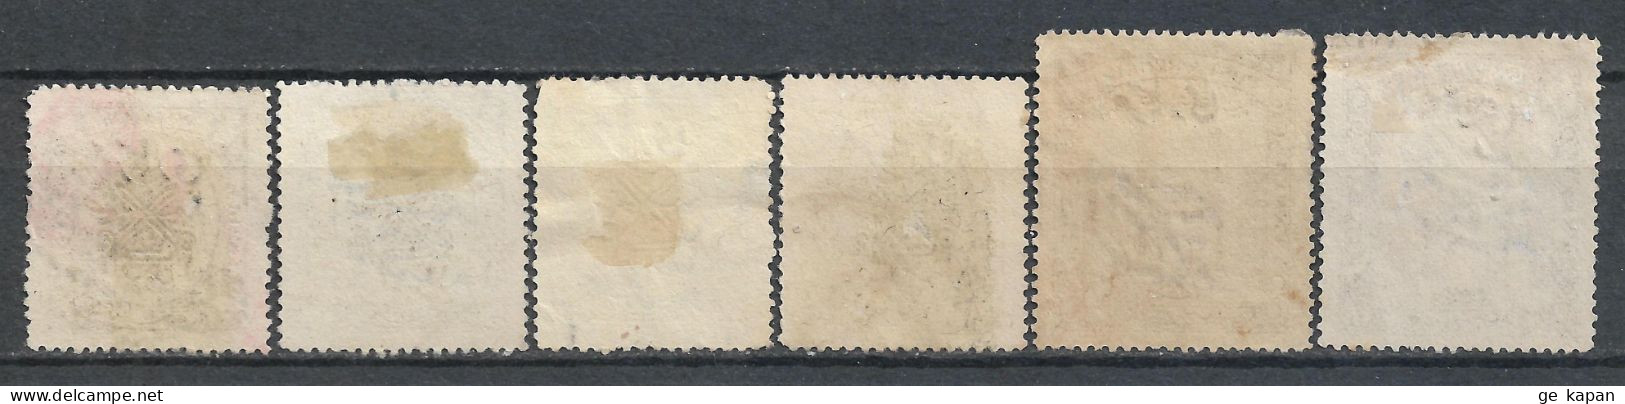 1934 INDIA State Hyderabad Official 6 Used Stamps (Scott # O46-O48) - Hyderabad